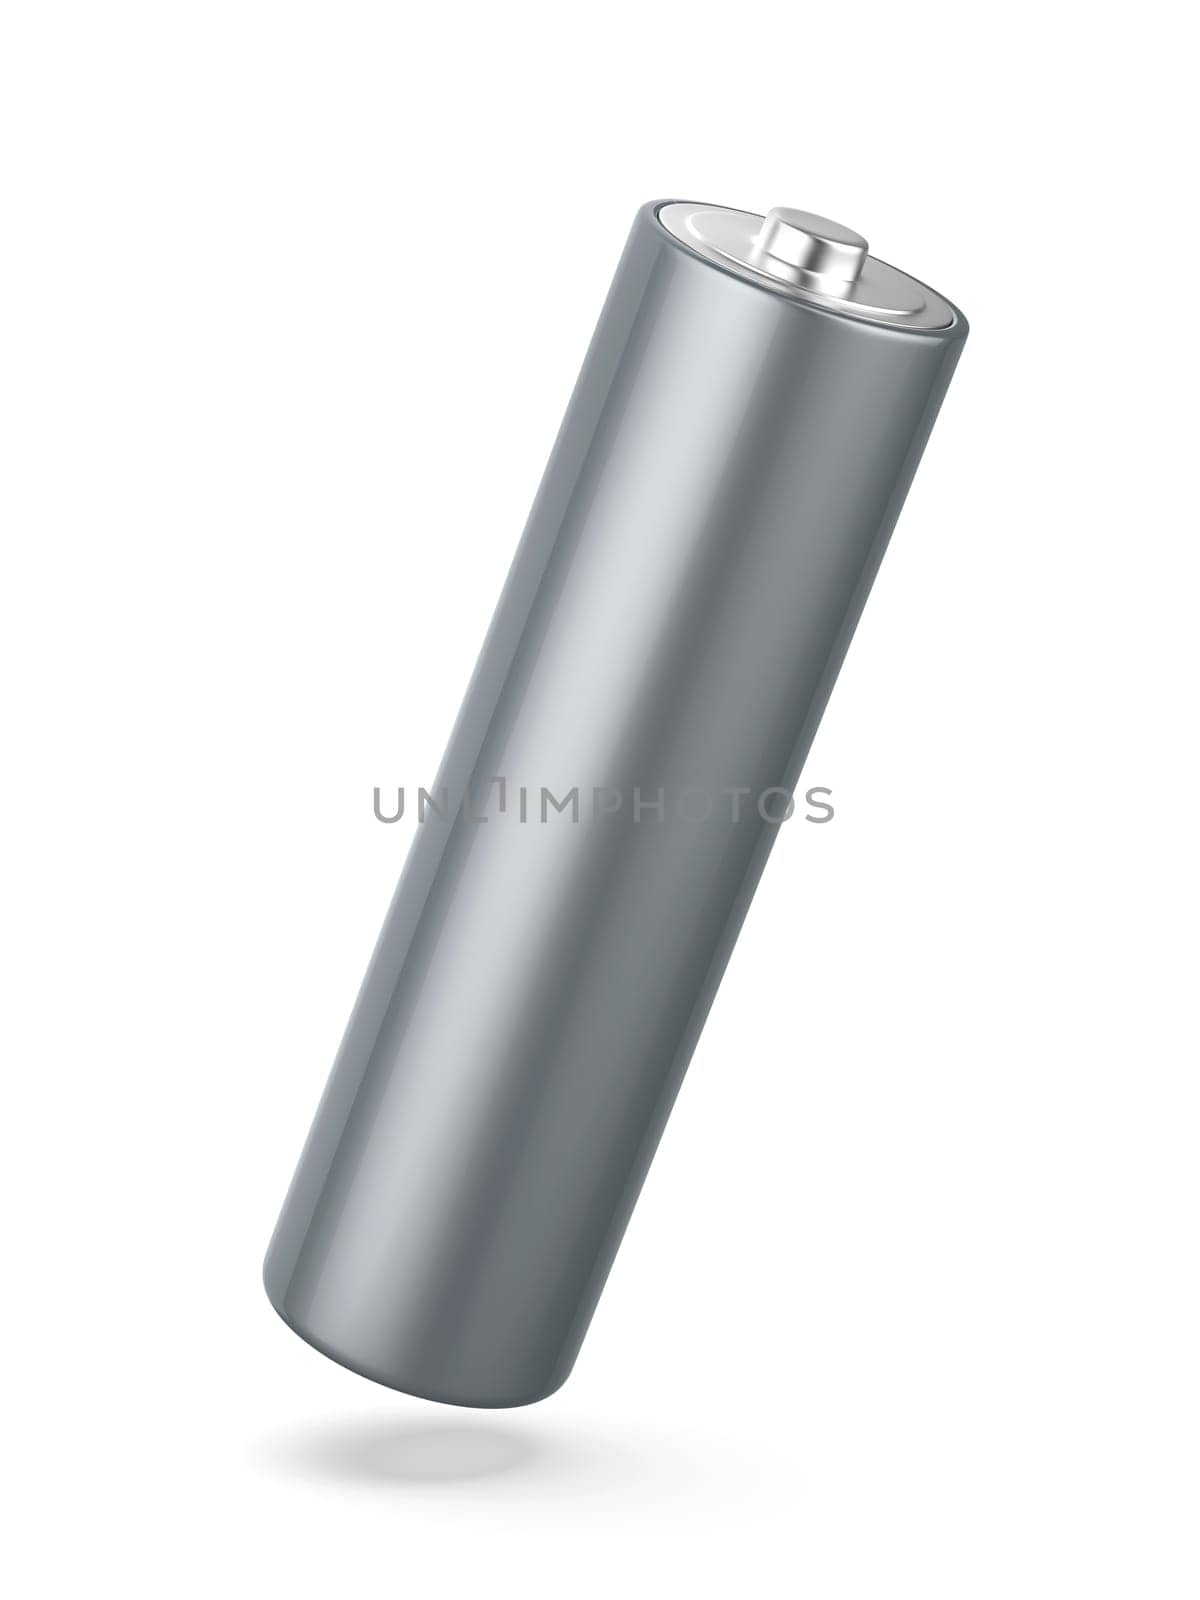 AA size battery on white background